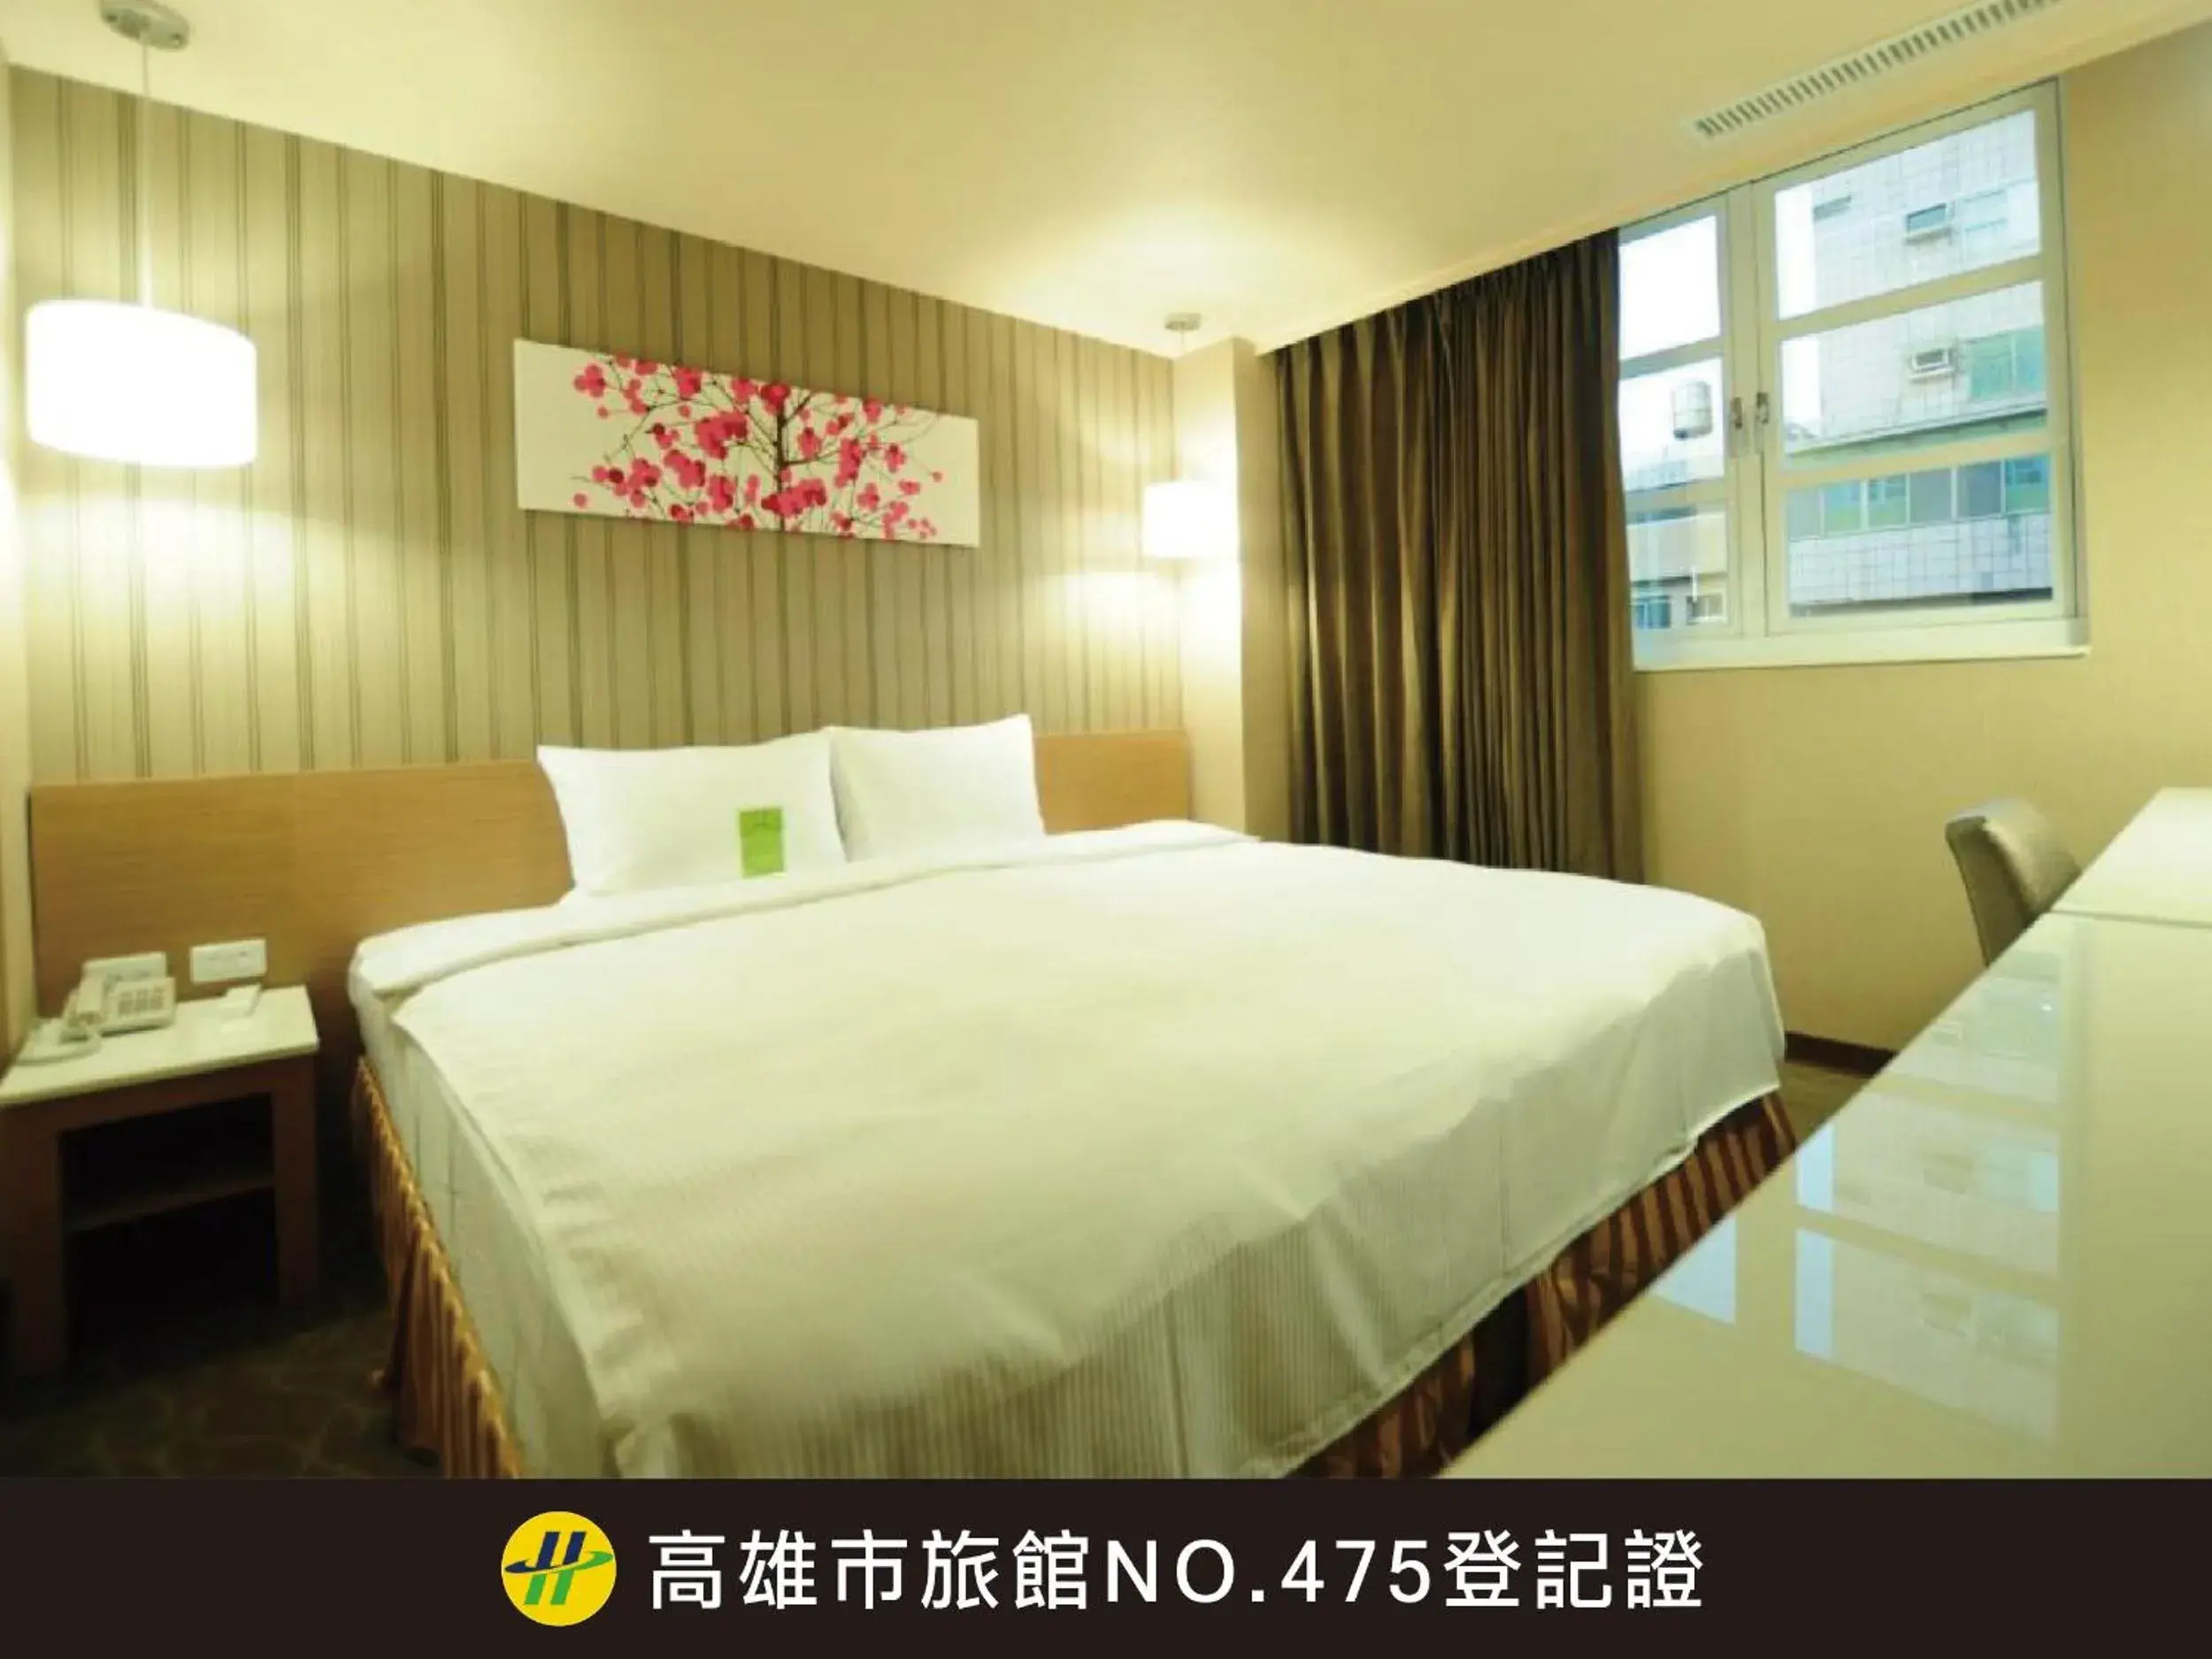 Bedroom, Bed in Kindness Hotel - Kaohsiung Jue Ming